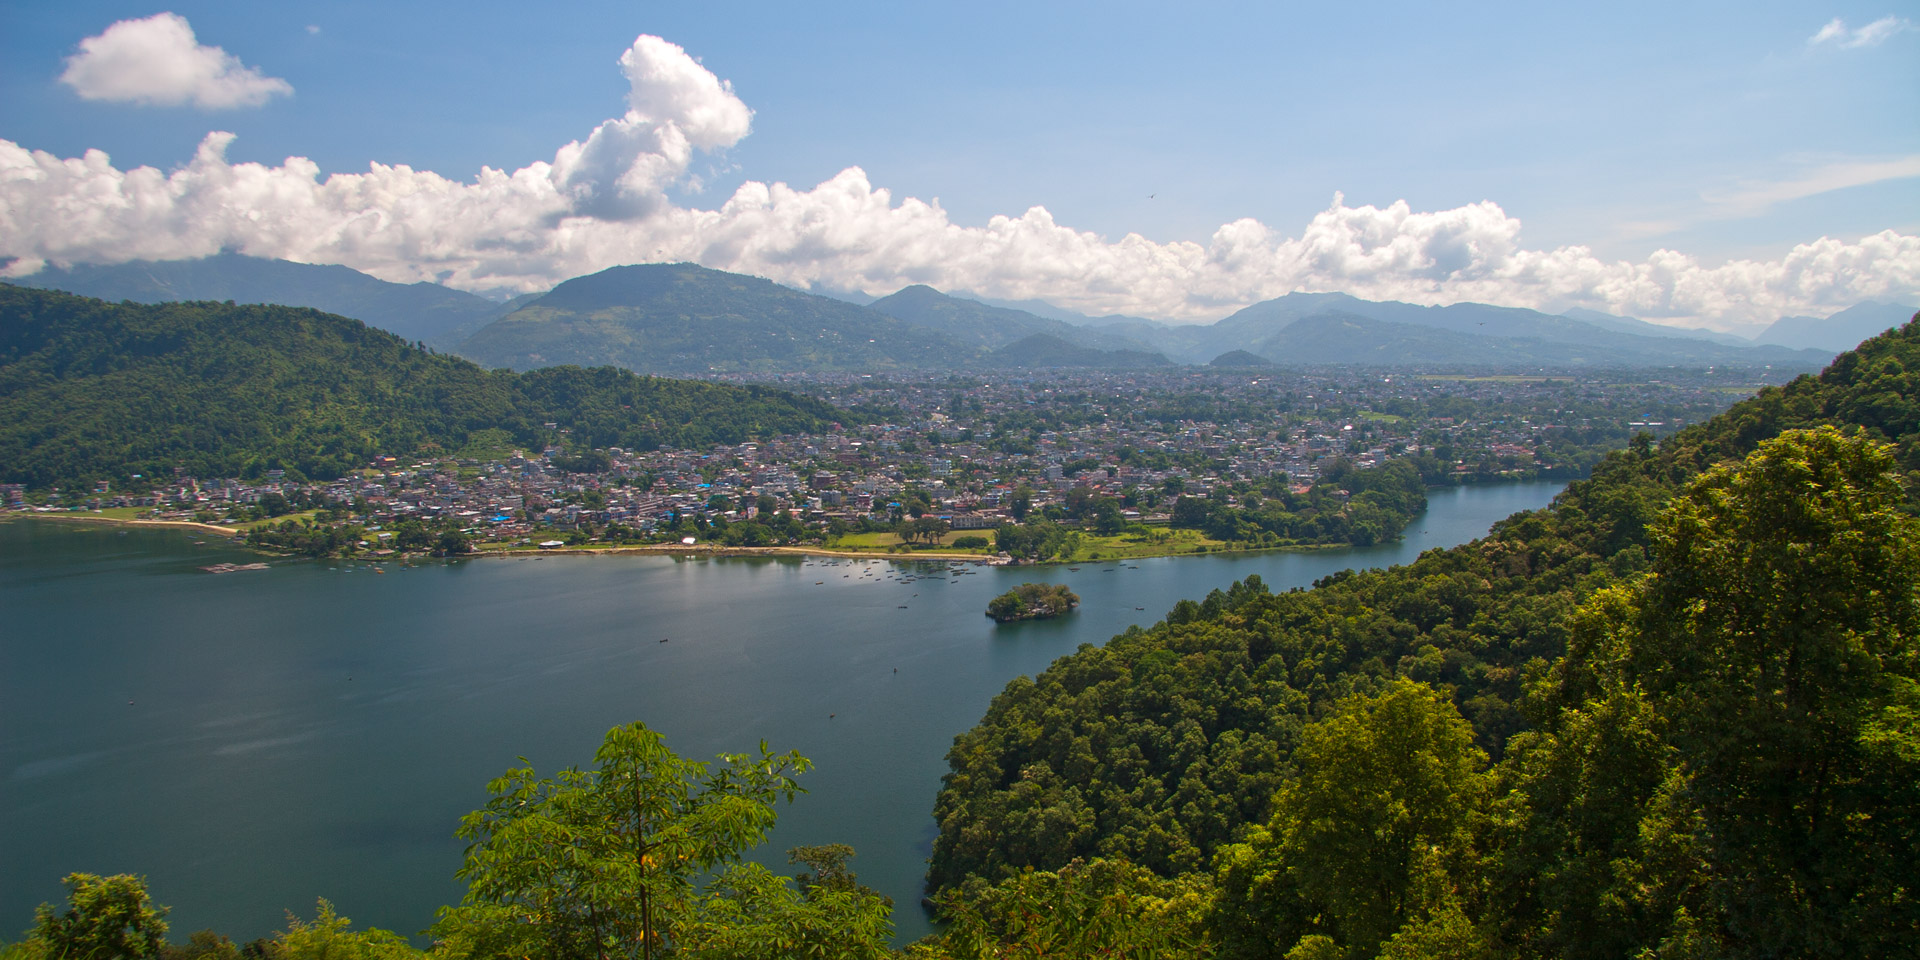 View of lakeside in Pokhara from the trail to the peace stupa